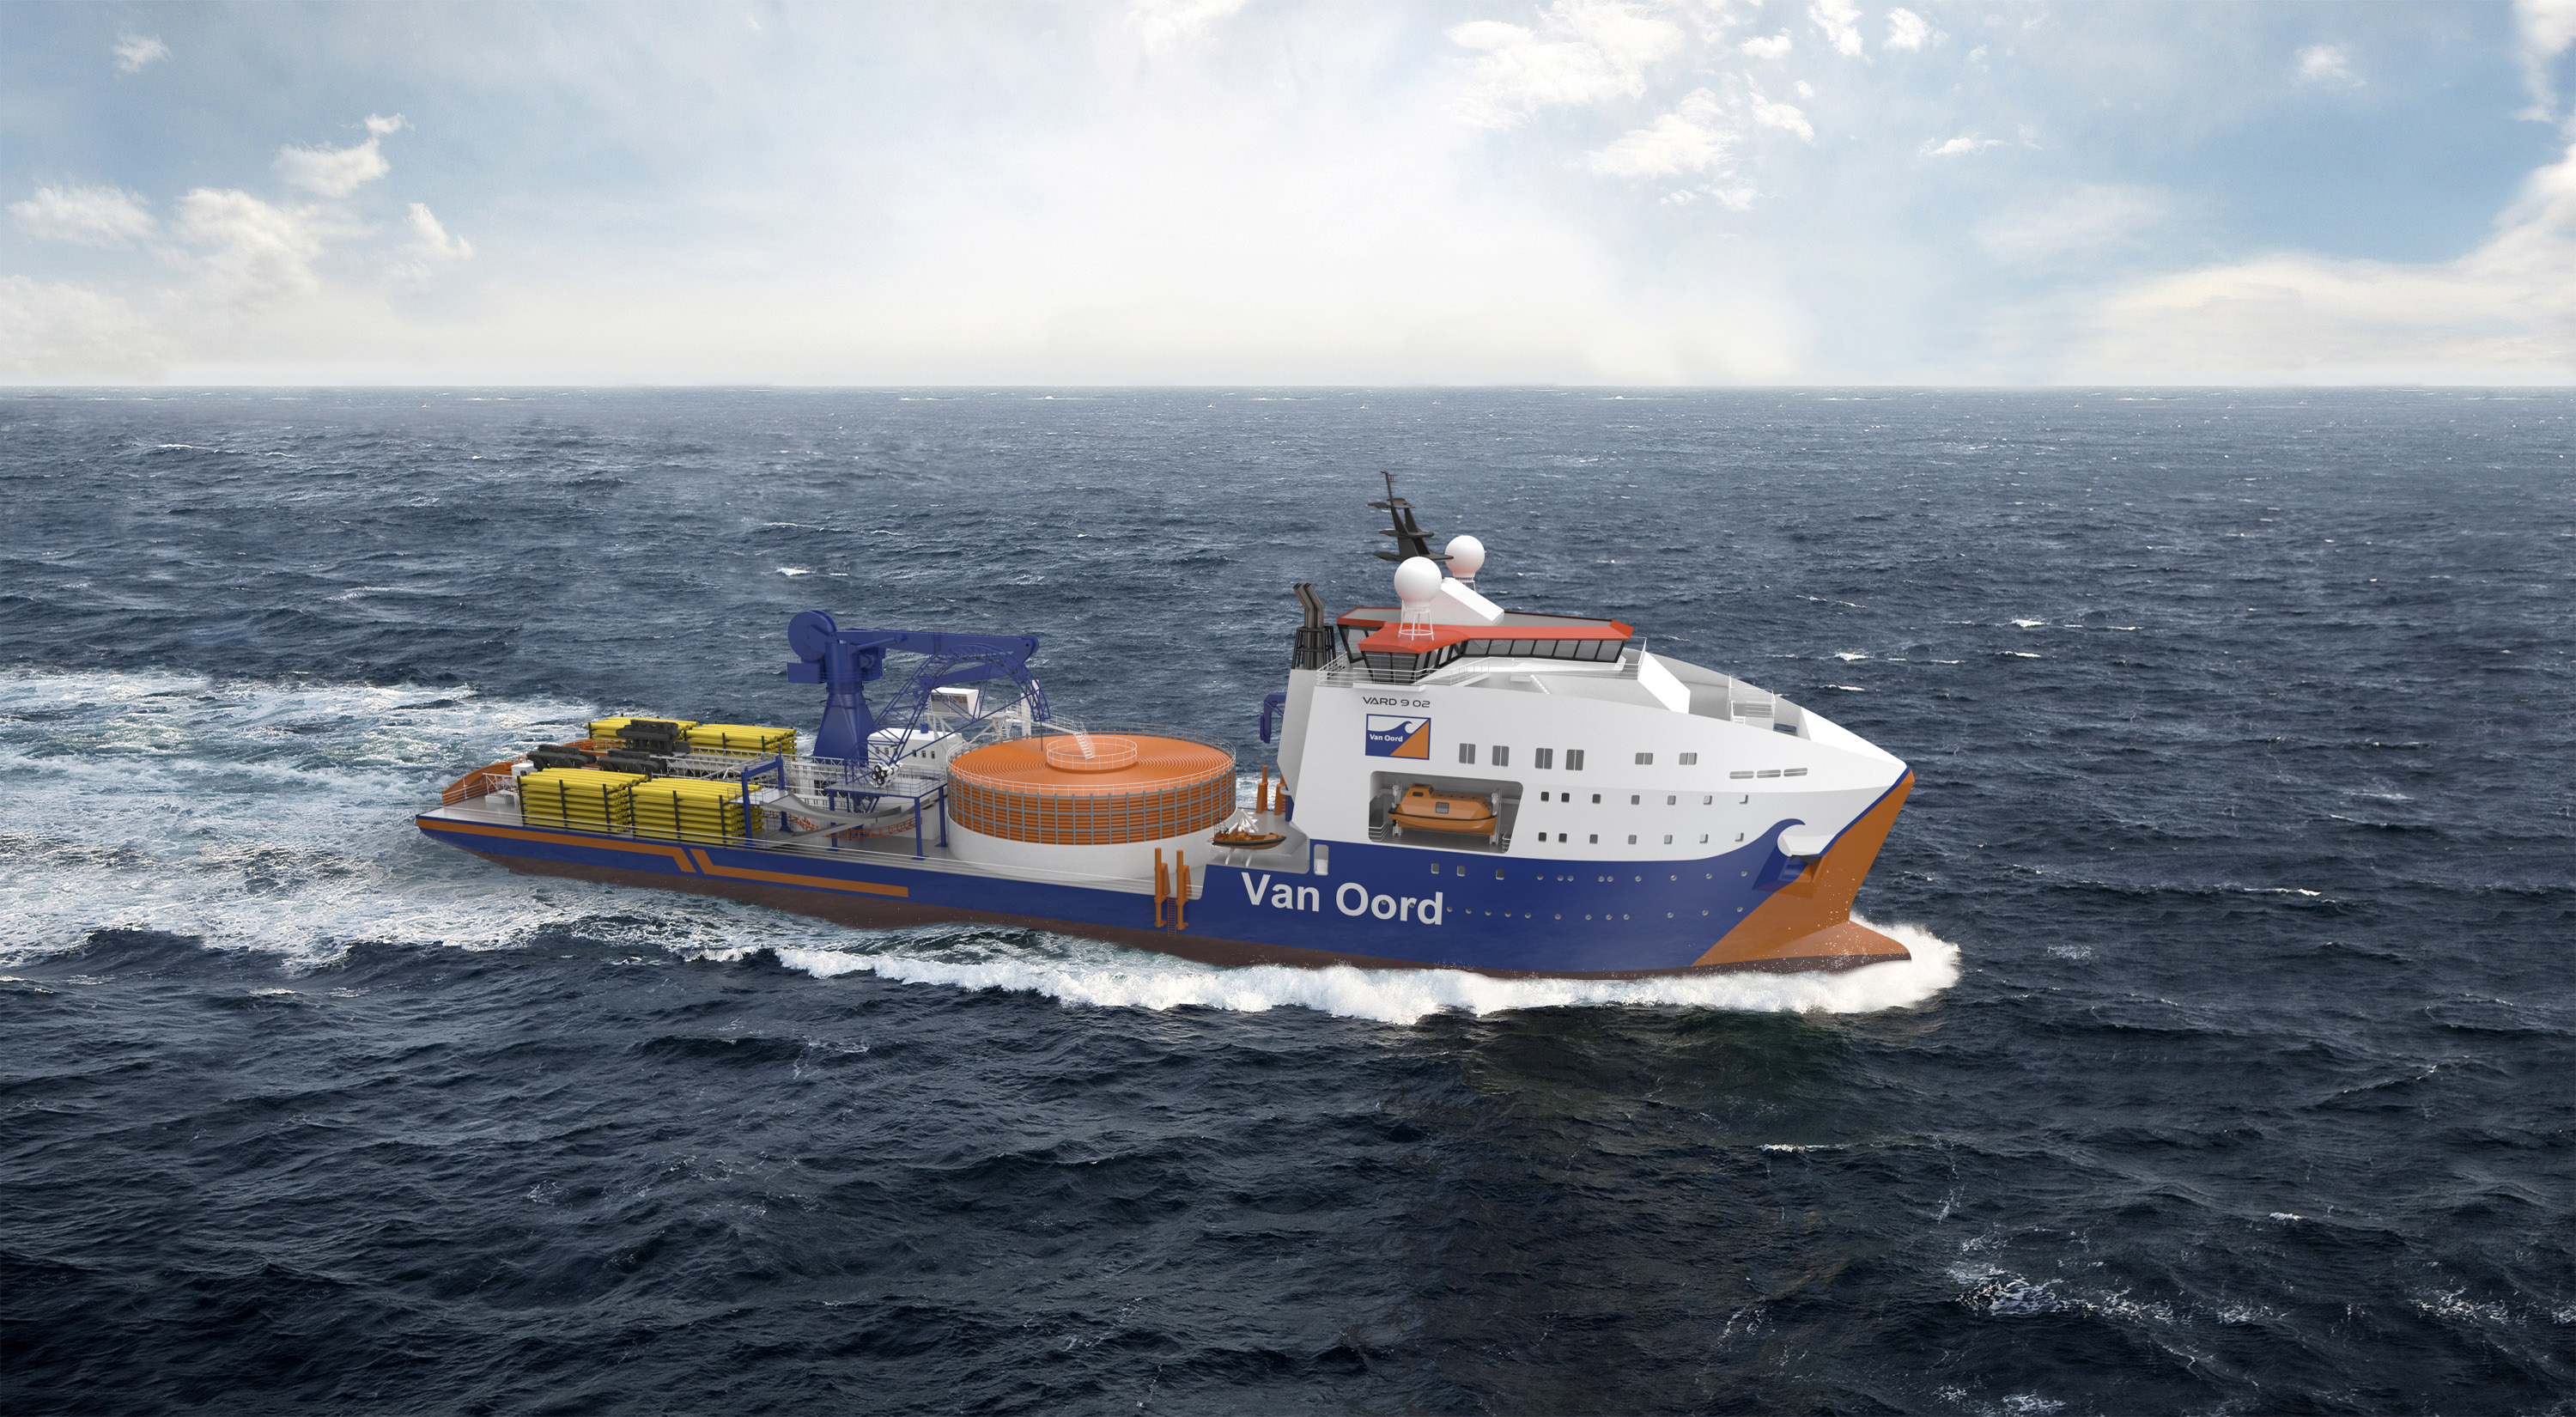 Red Rock Crane for Van Oord's New Cable Layer